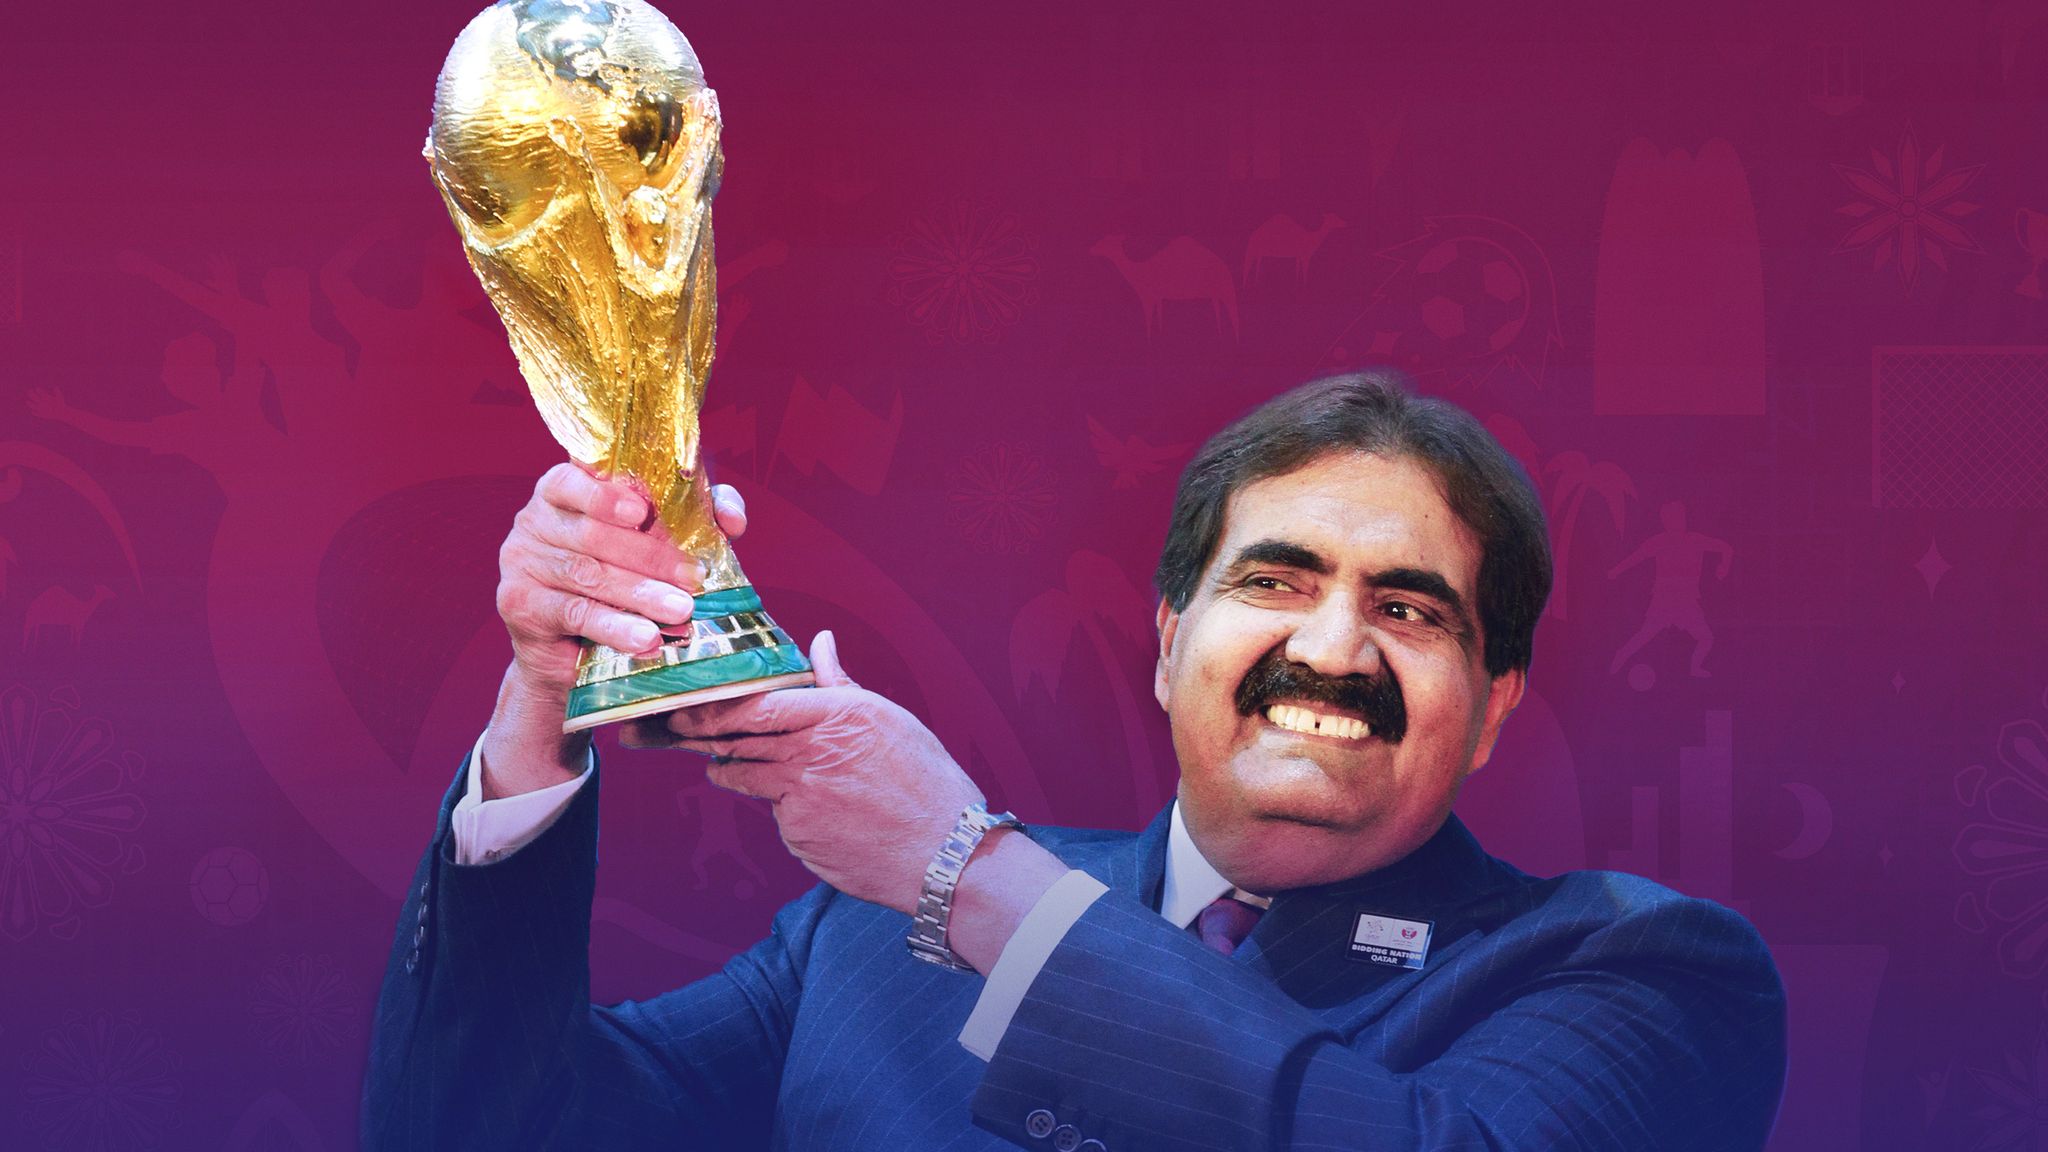 Encyclopedia Skoleuddannelse åbenbaring Qatar 2022: What has been built for the 2022 World Cup, what it has cost in  lives and how much was spent on construction | World News | Sky News